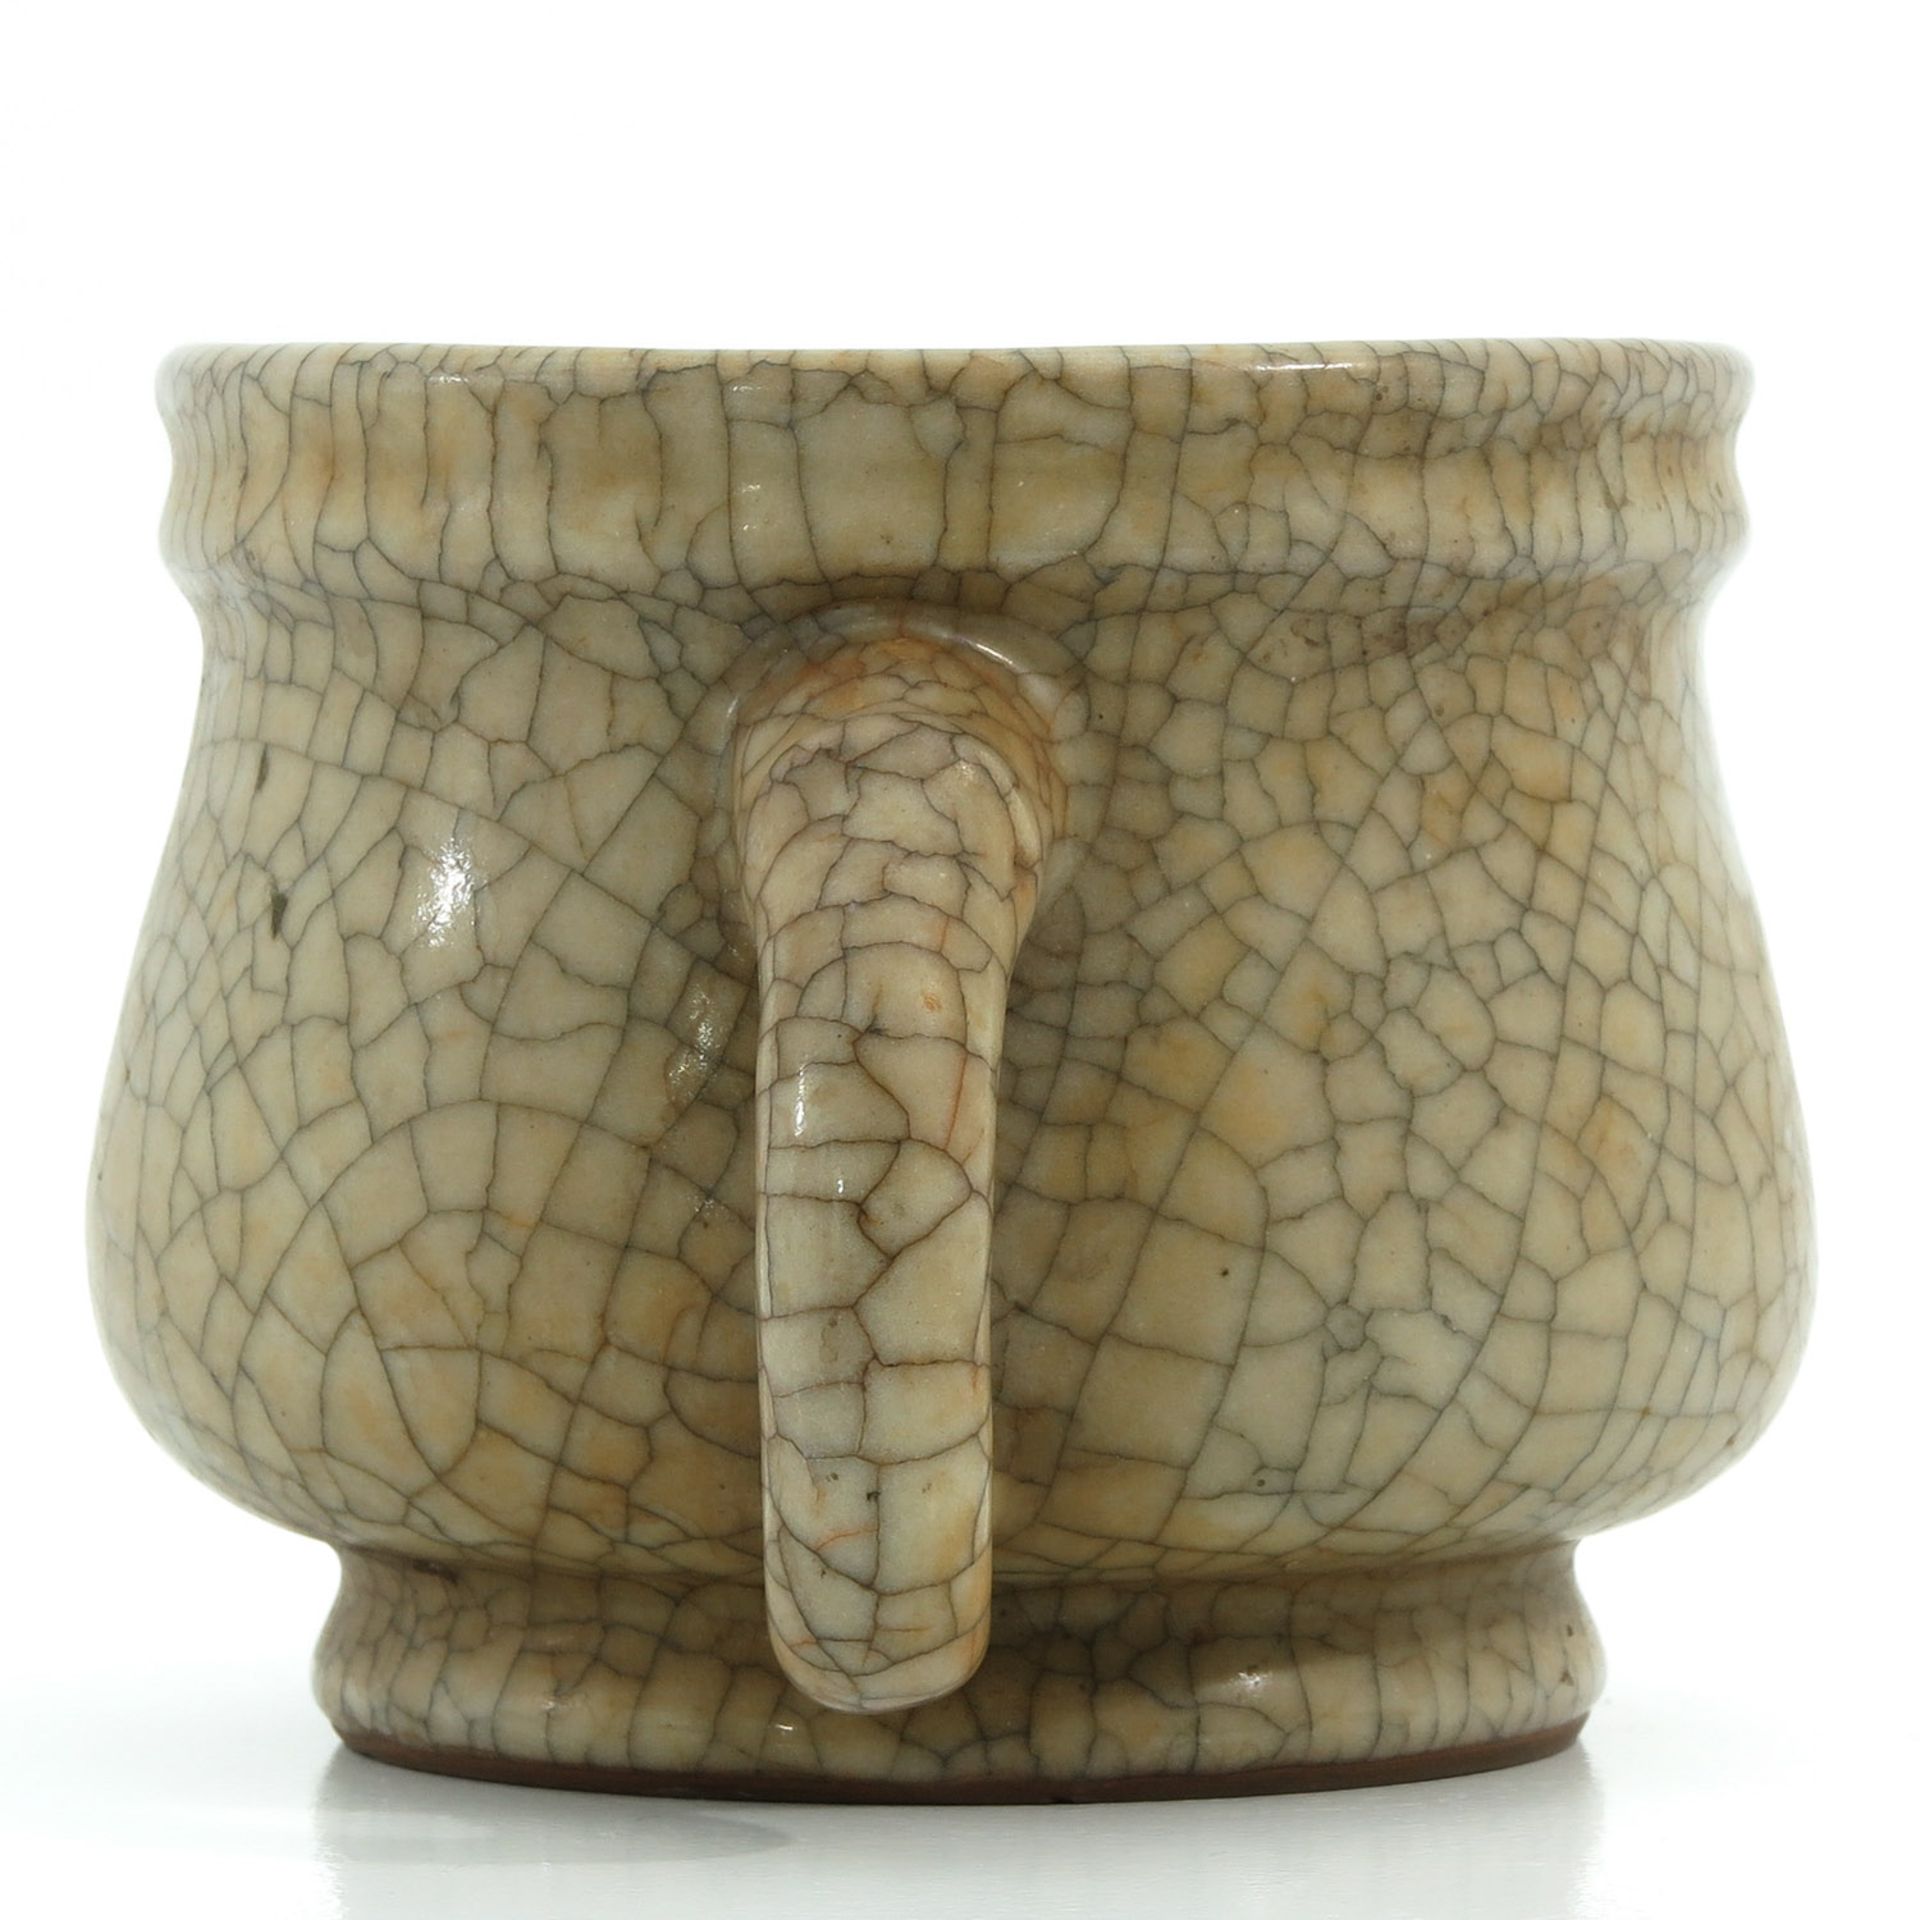 A Crackle Decor Vase with Handles - Image 2 of 9